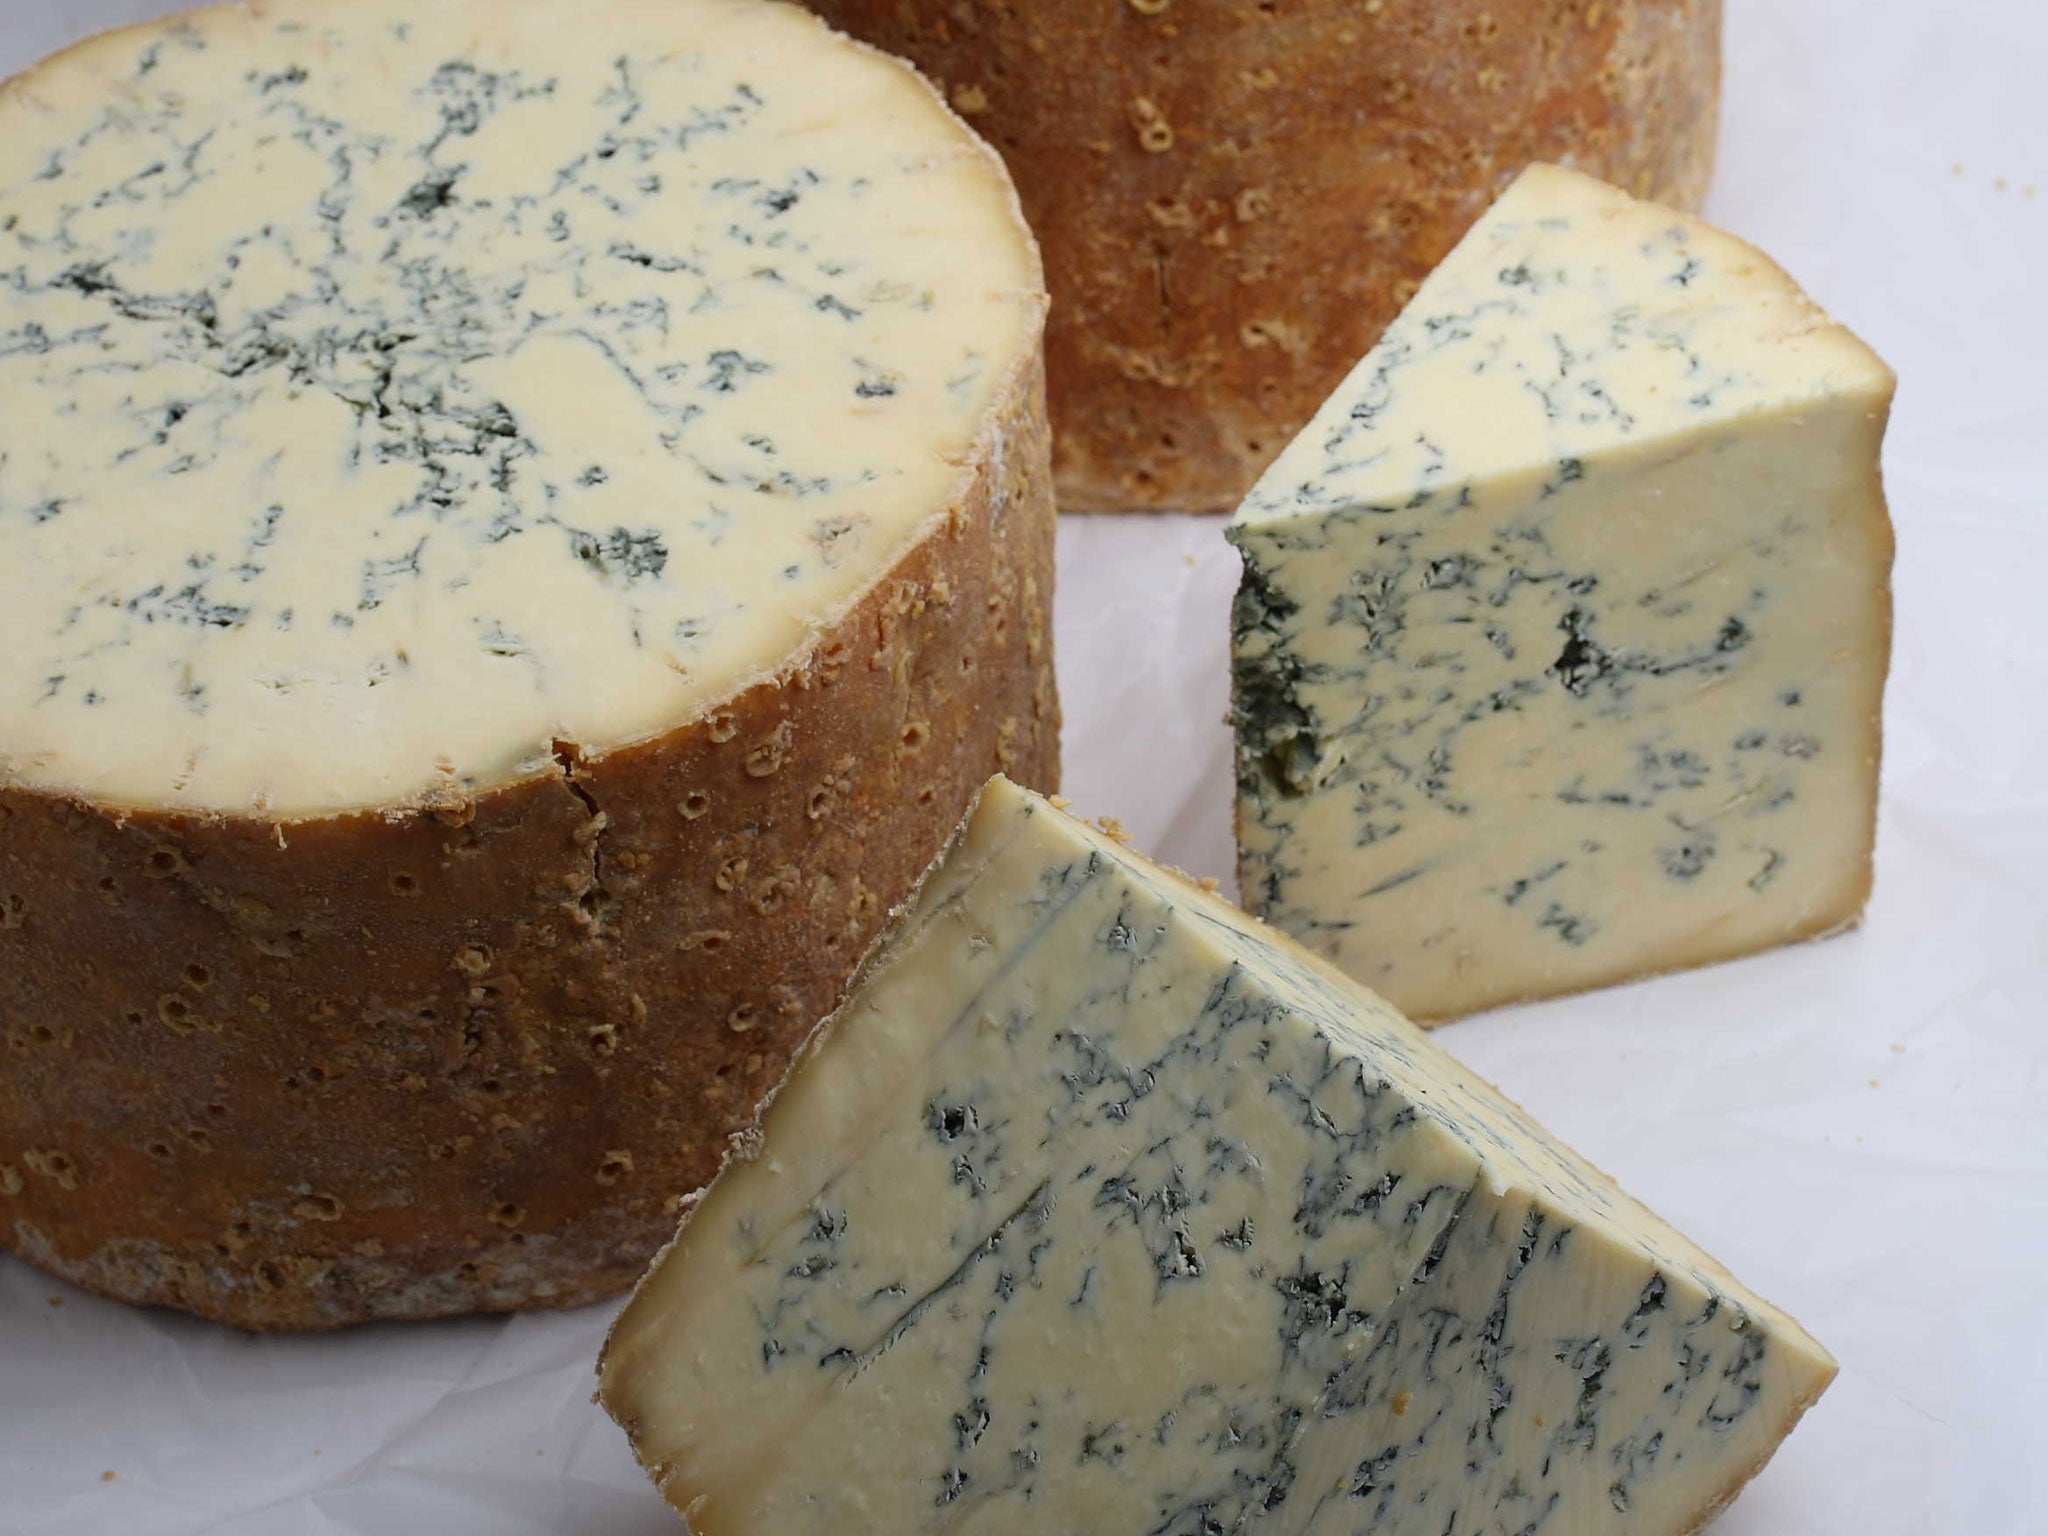 Stilton was among the cheeses affected by the ban